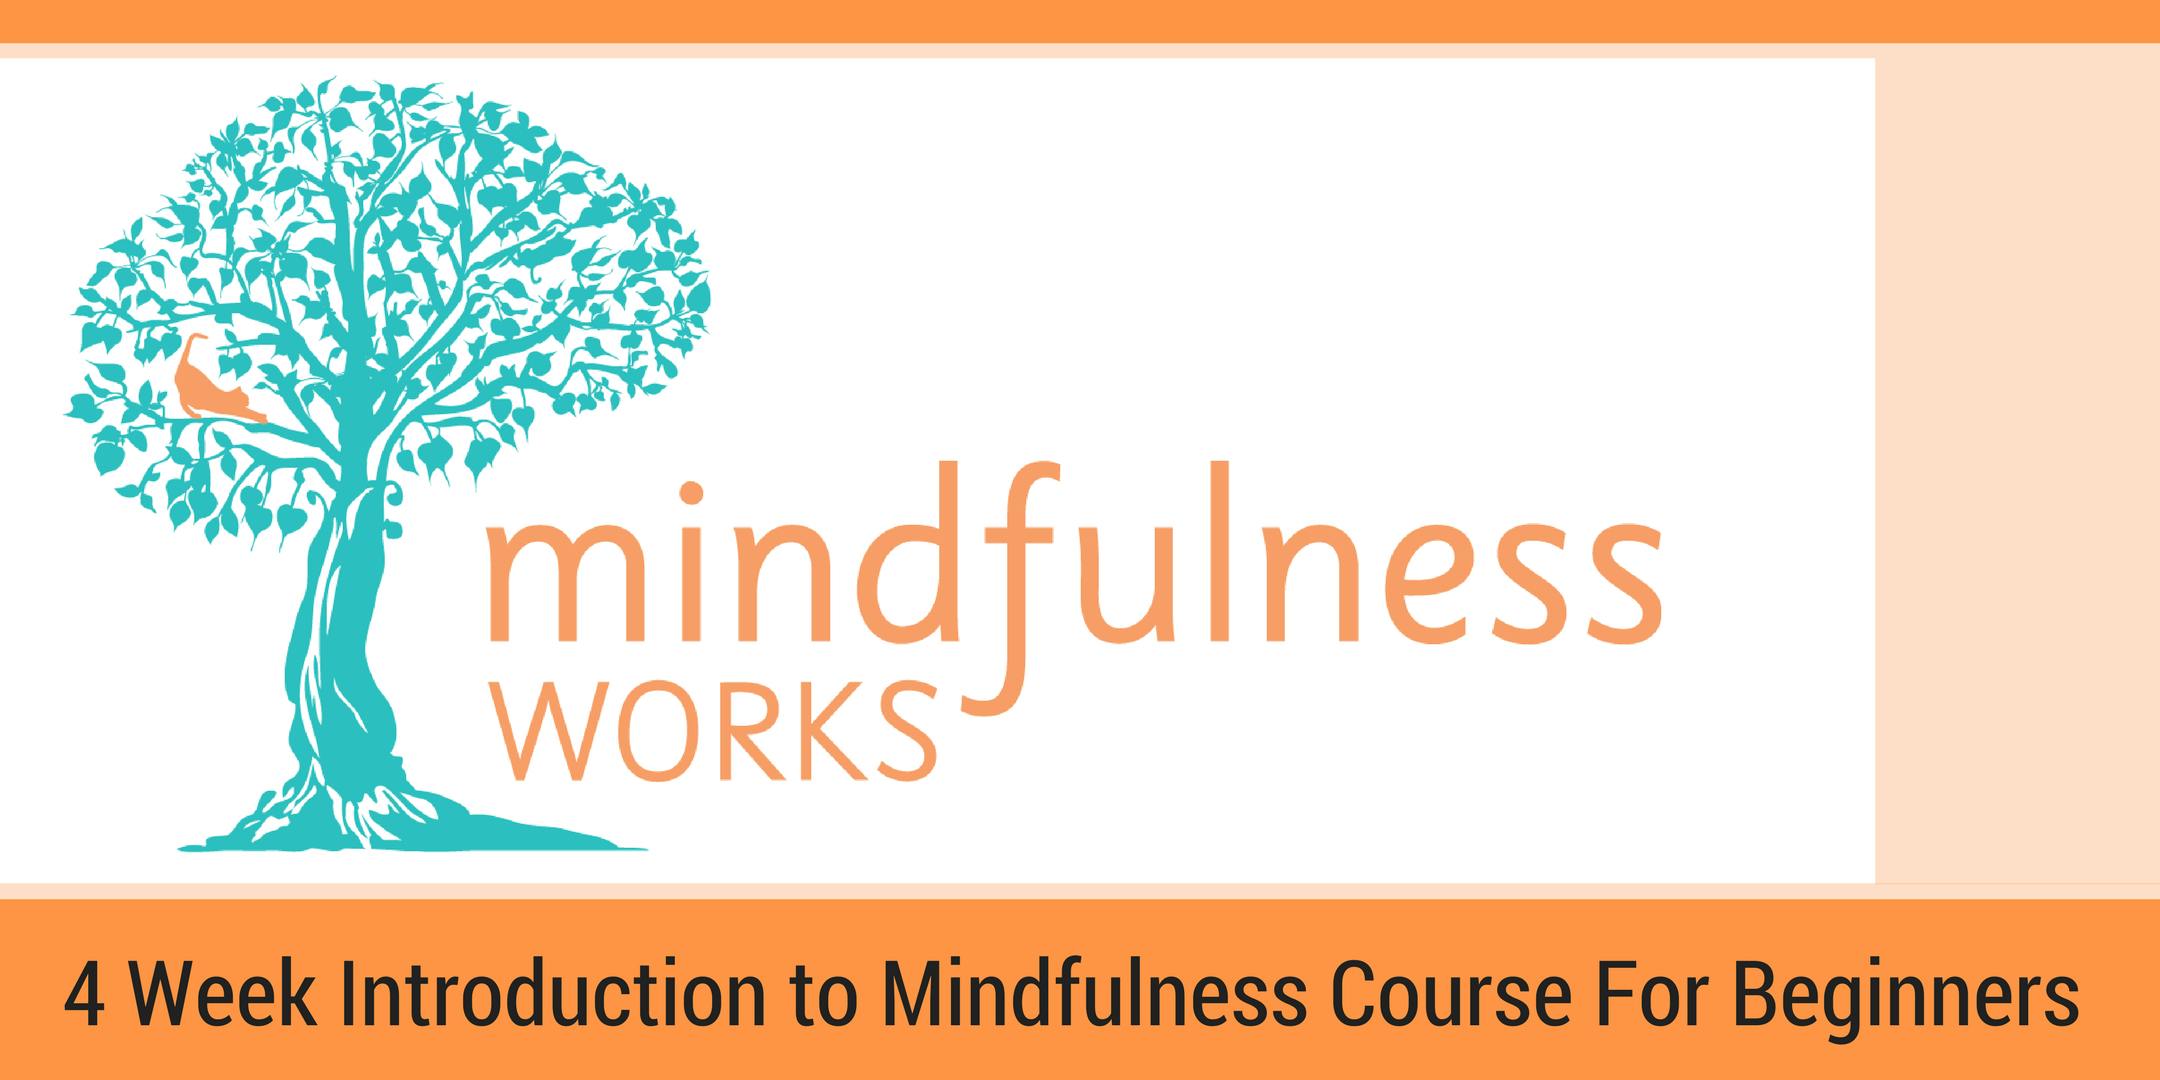 Melbourne (Mitcham) – An Introduction to Mindfulness & Meditation 4 Week Course. 